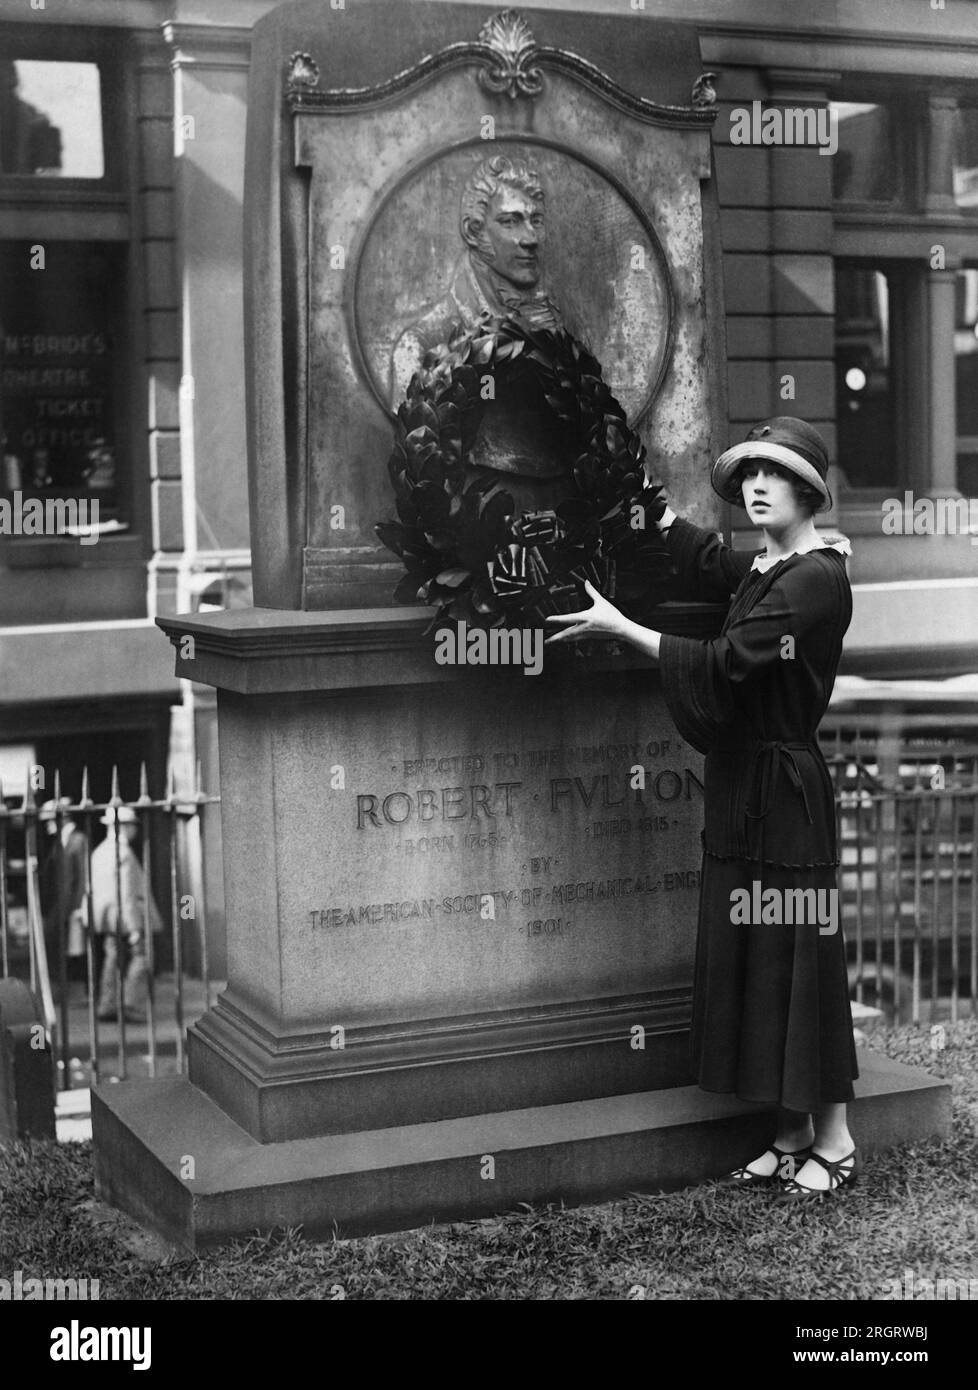 New York, New York:  August 17, 1923 Actress Marion Davies hangs a wreath on the monument for Robert Fulton in the Trinity Chuch courtyard. She is starring in the film, 'Little Old New York', which includes the scene of Fulton's steamship's inaugural voyage. Stock Photo